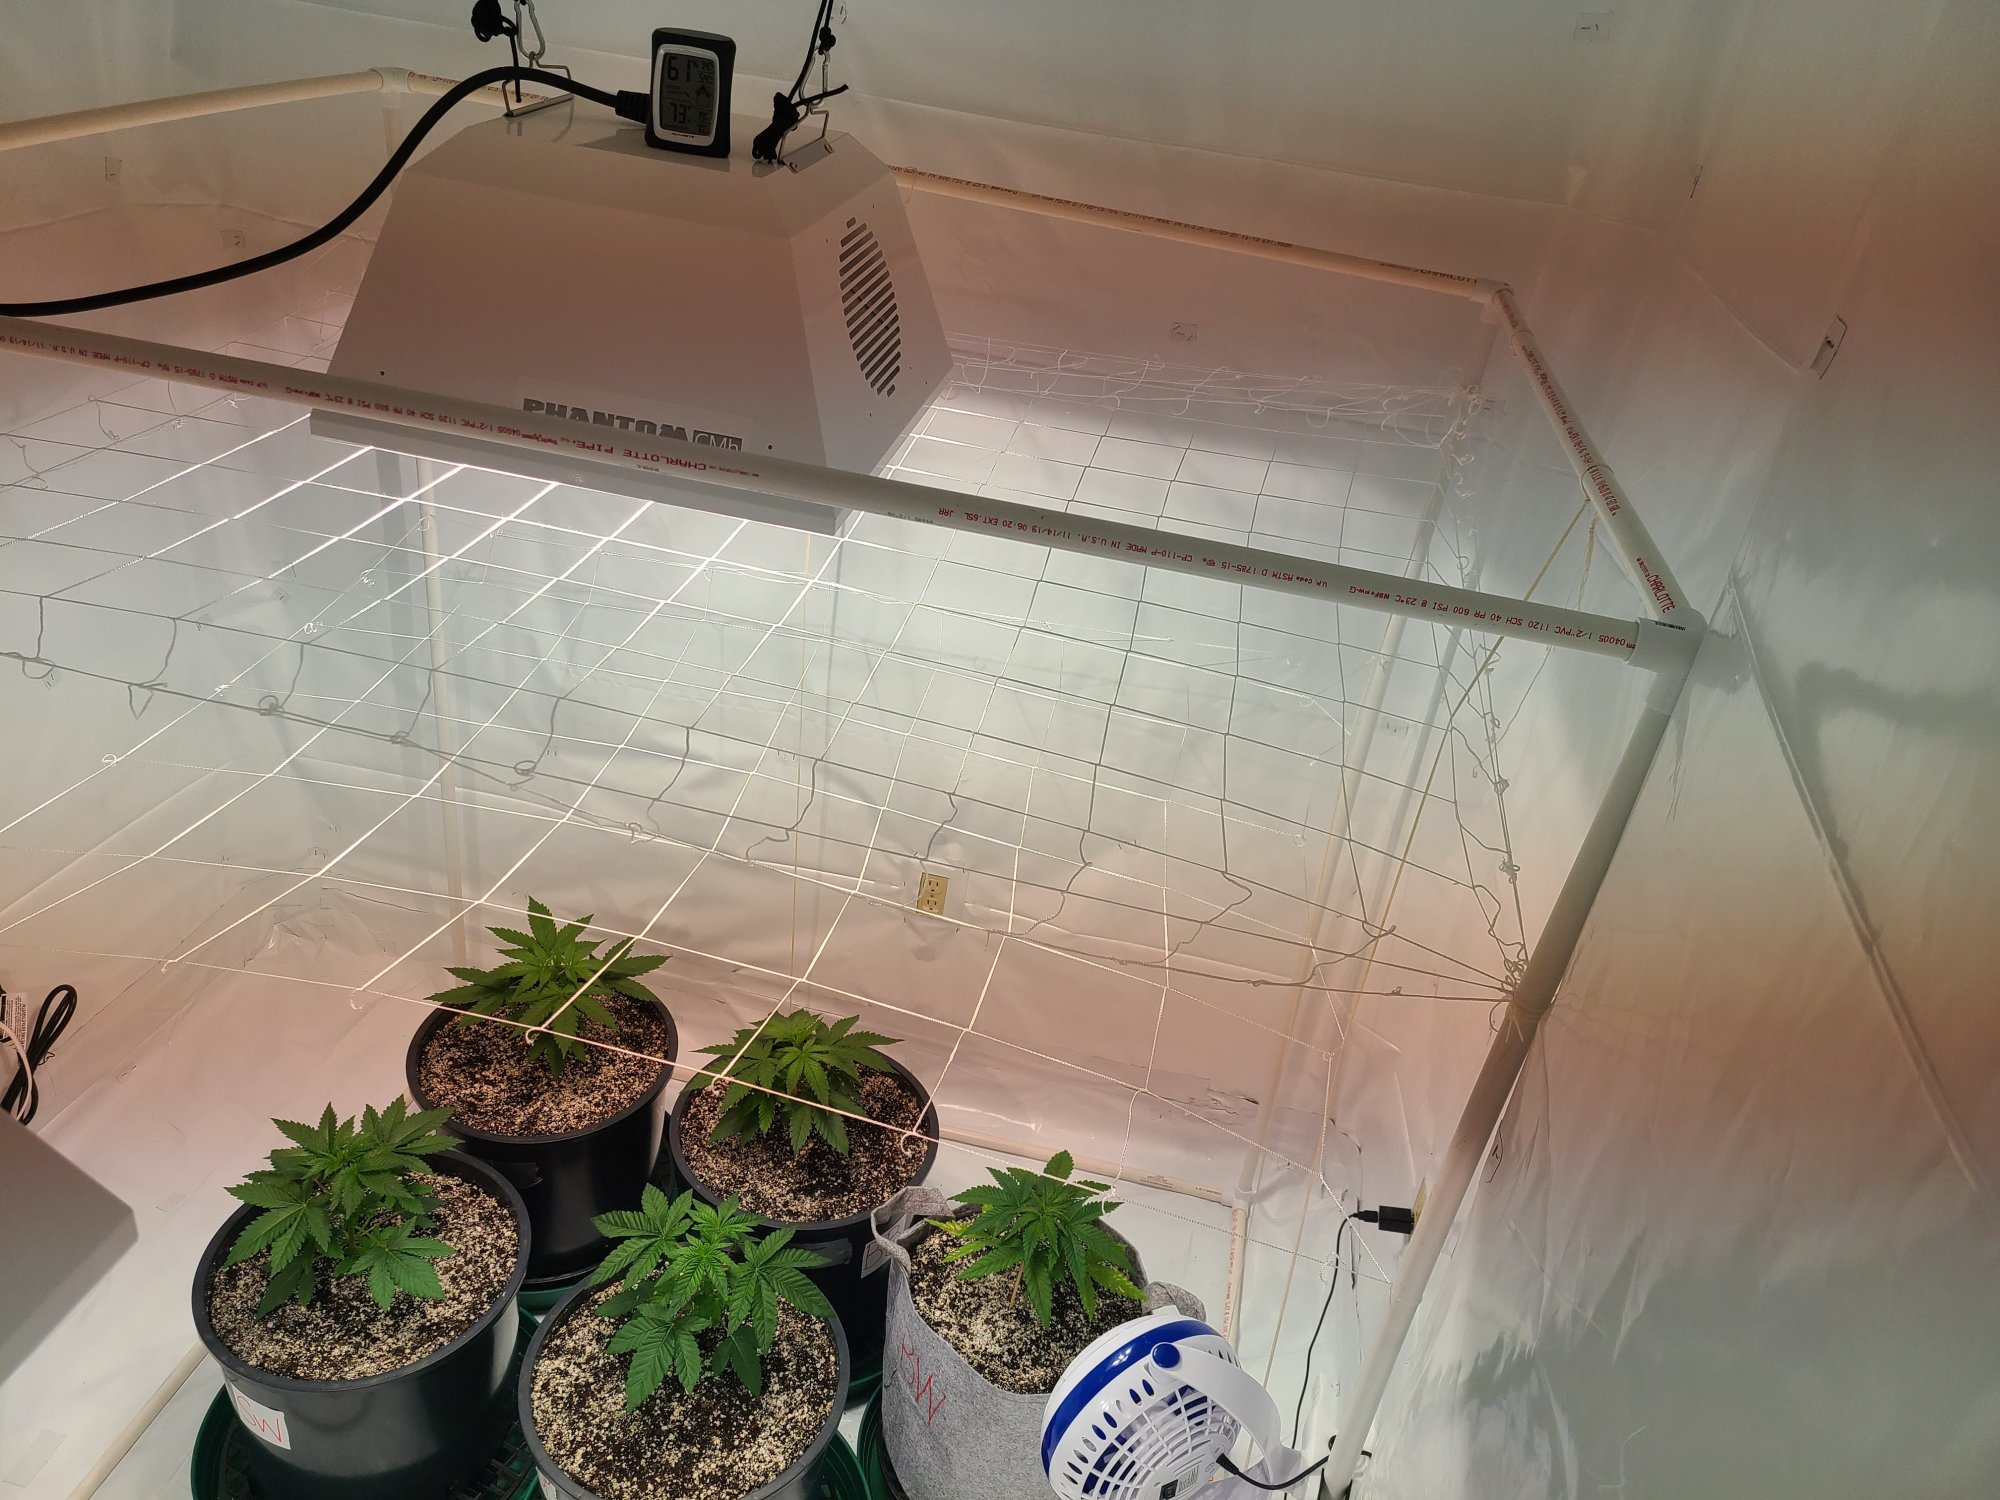 Can you top and scrog 2